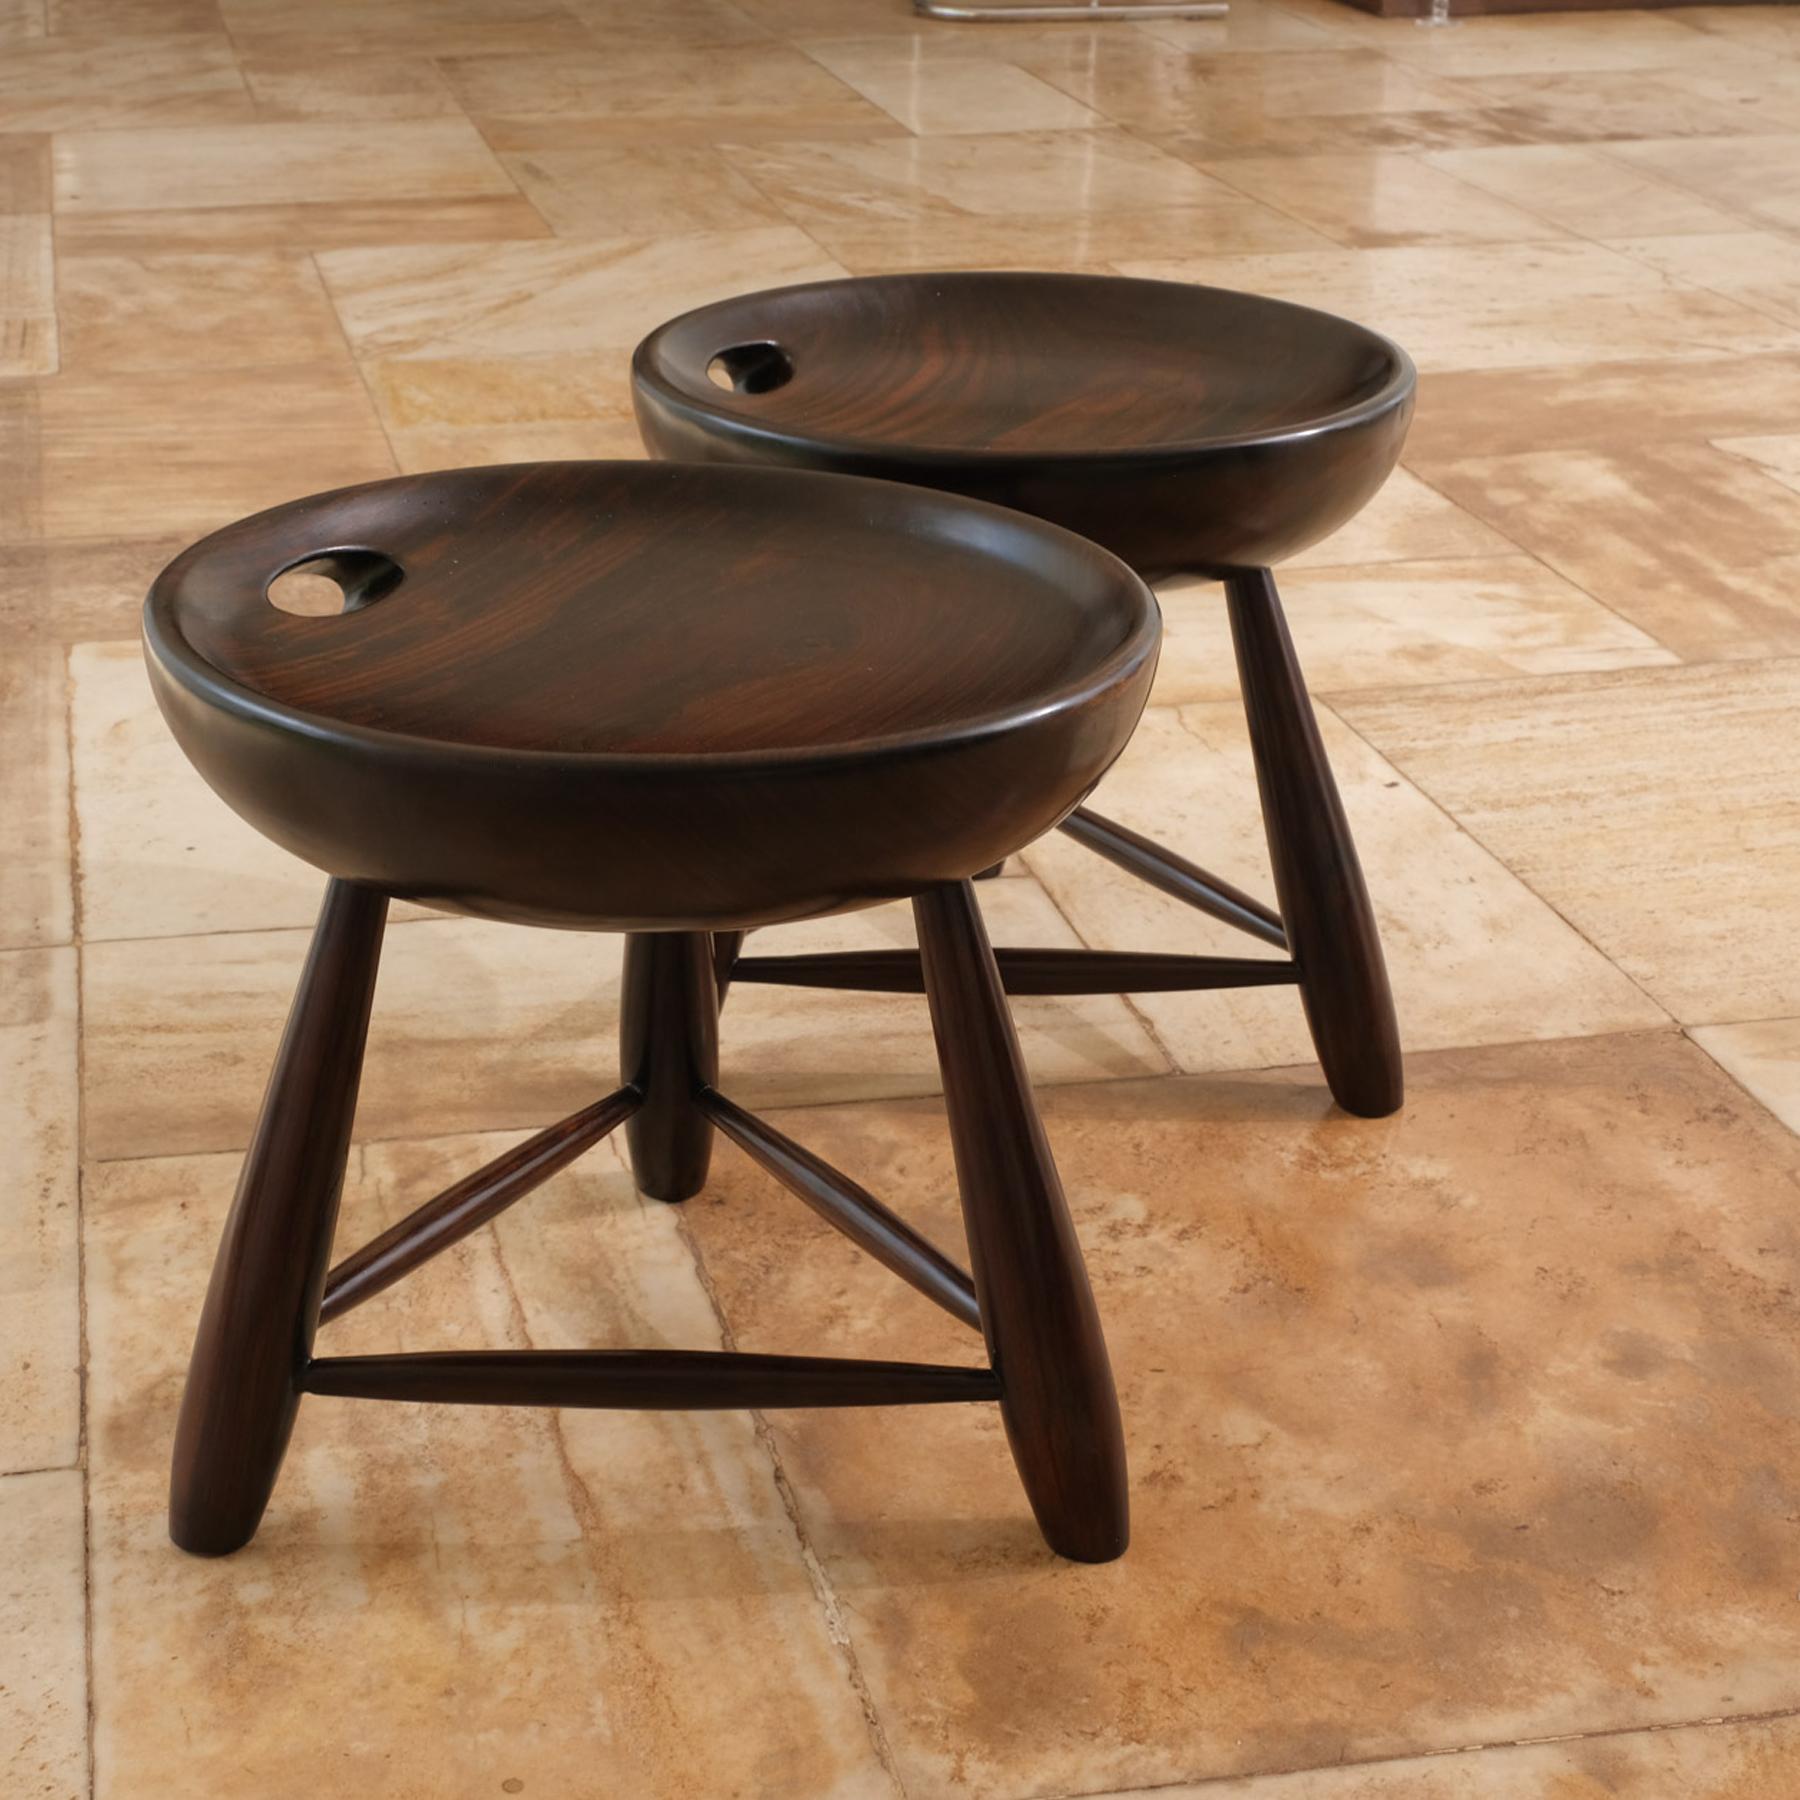 The mocho stool was designed by Sergio Rodrigues in 1954, before founding the Oca store.
Made from solid turned wood, it is a free interpretation of the 